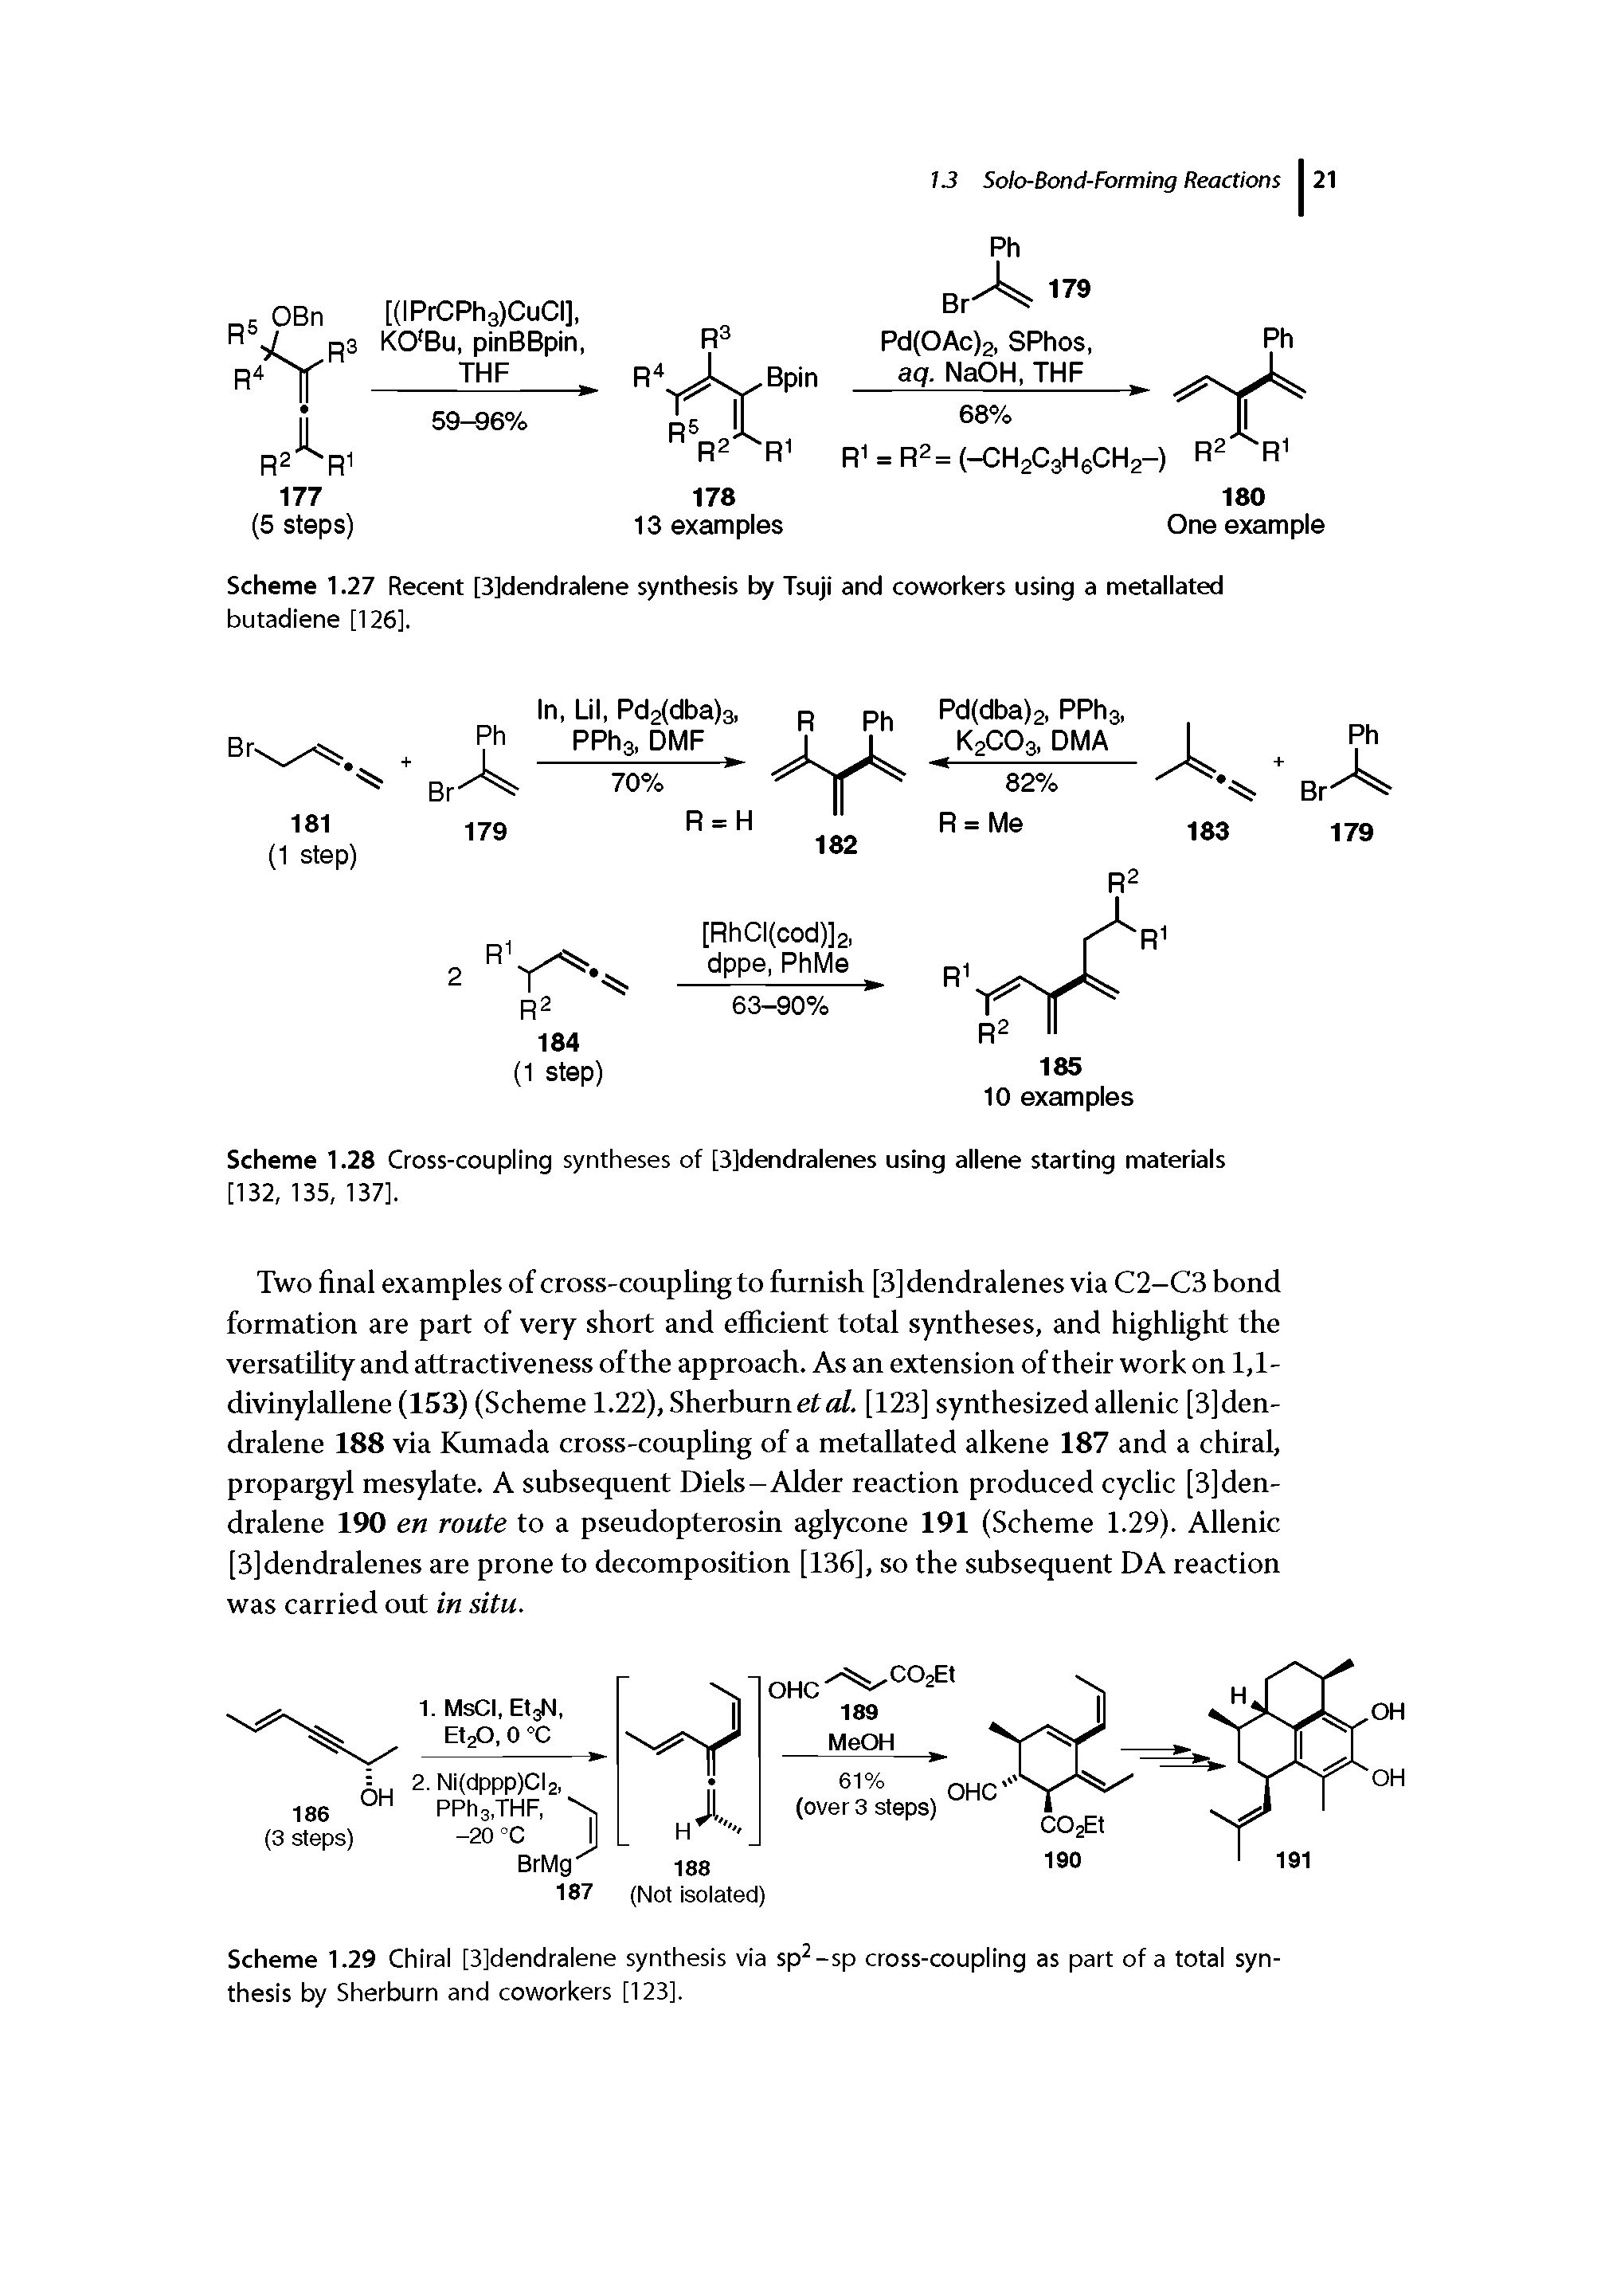 Scheme 1.27 Recent [3]dendralene synthesis by Tsuji and coworkers using a metallated butadiene [126].